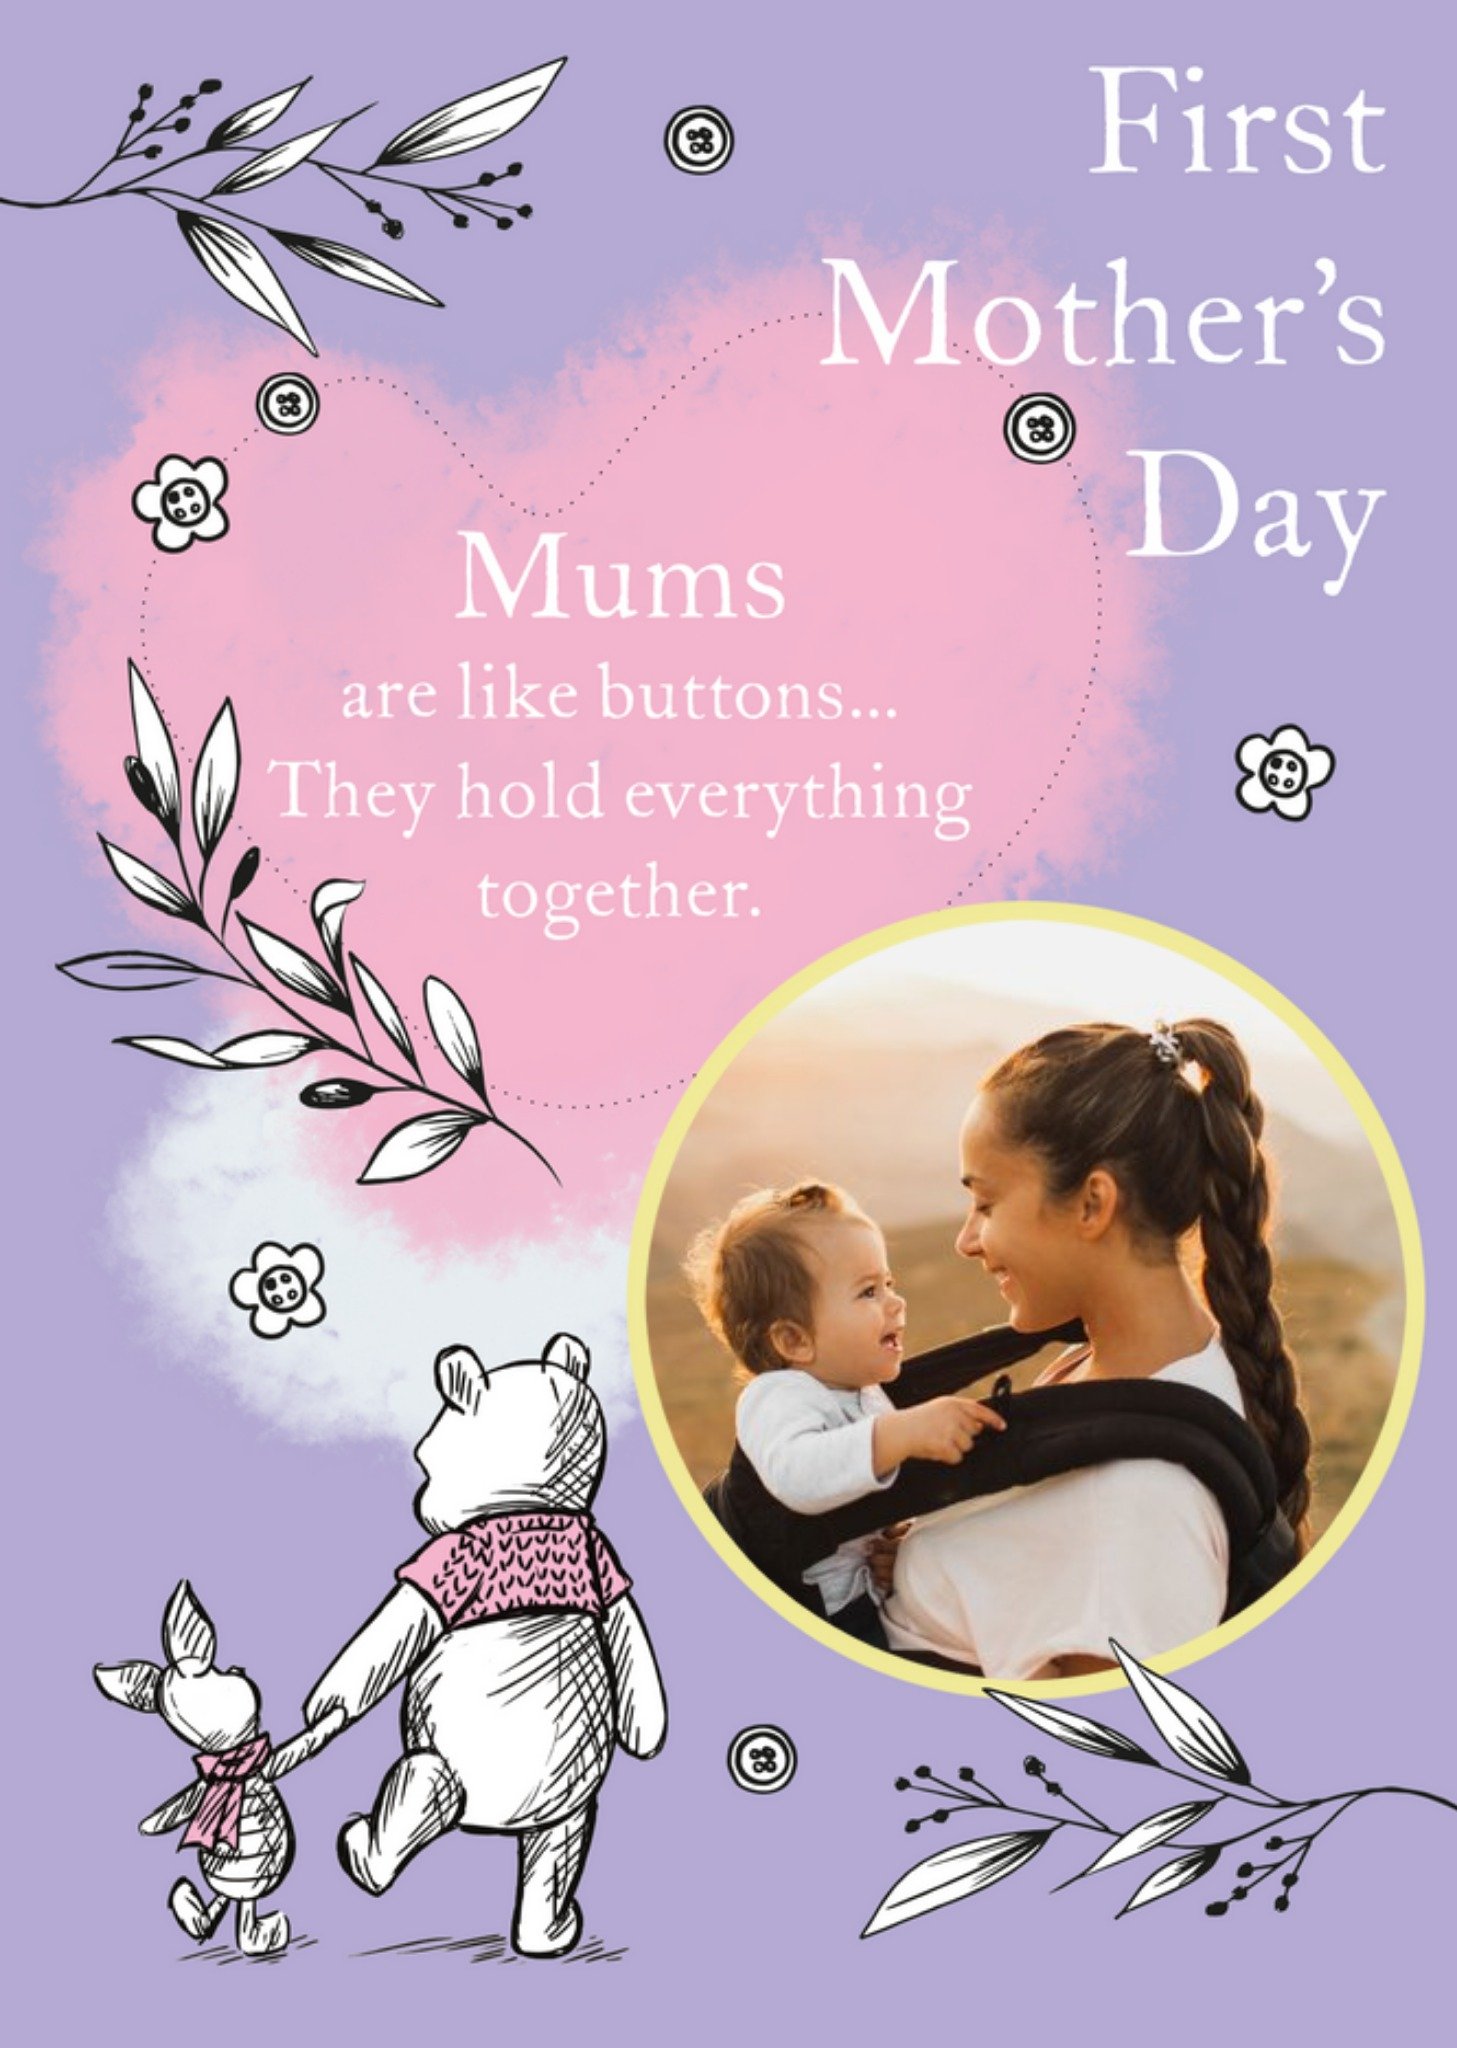 Disney Winnie The Pooh Mum's Are Like Buttons Mother's Day Photo Upload Card, Large